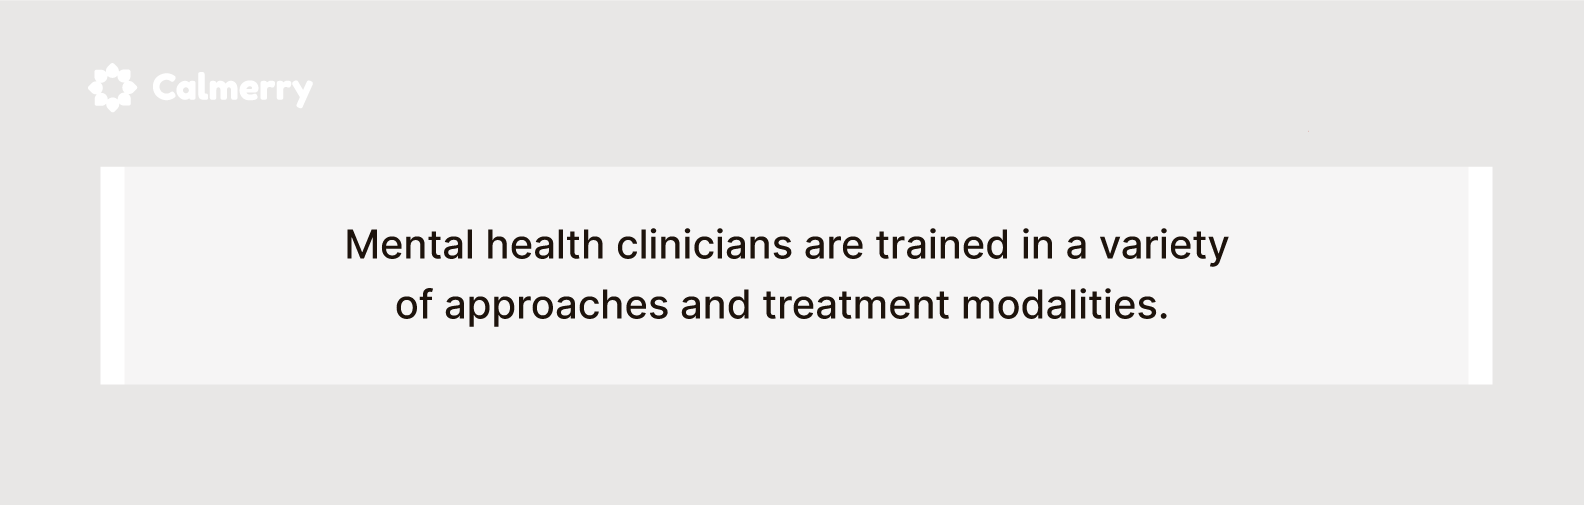 Mental health clinicians are trained in a variety of approaches